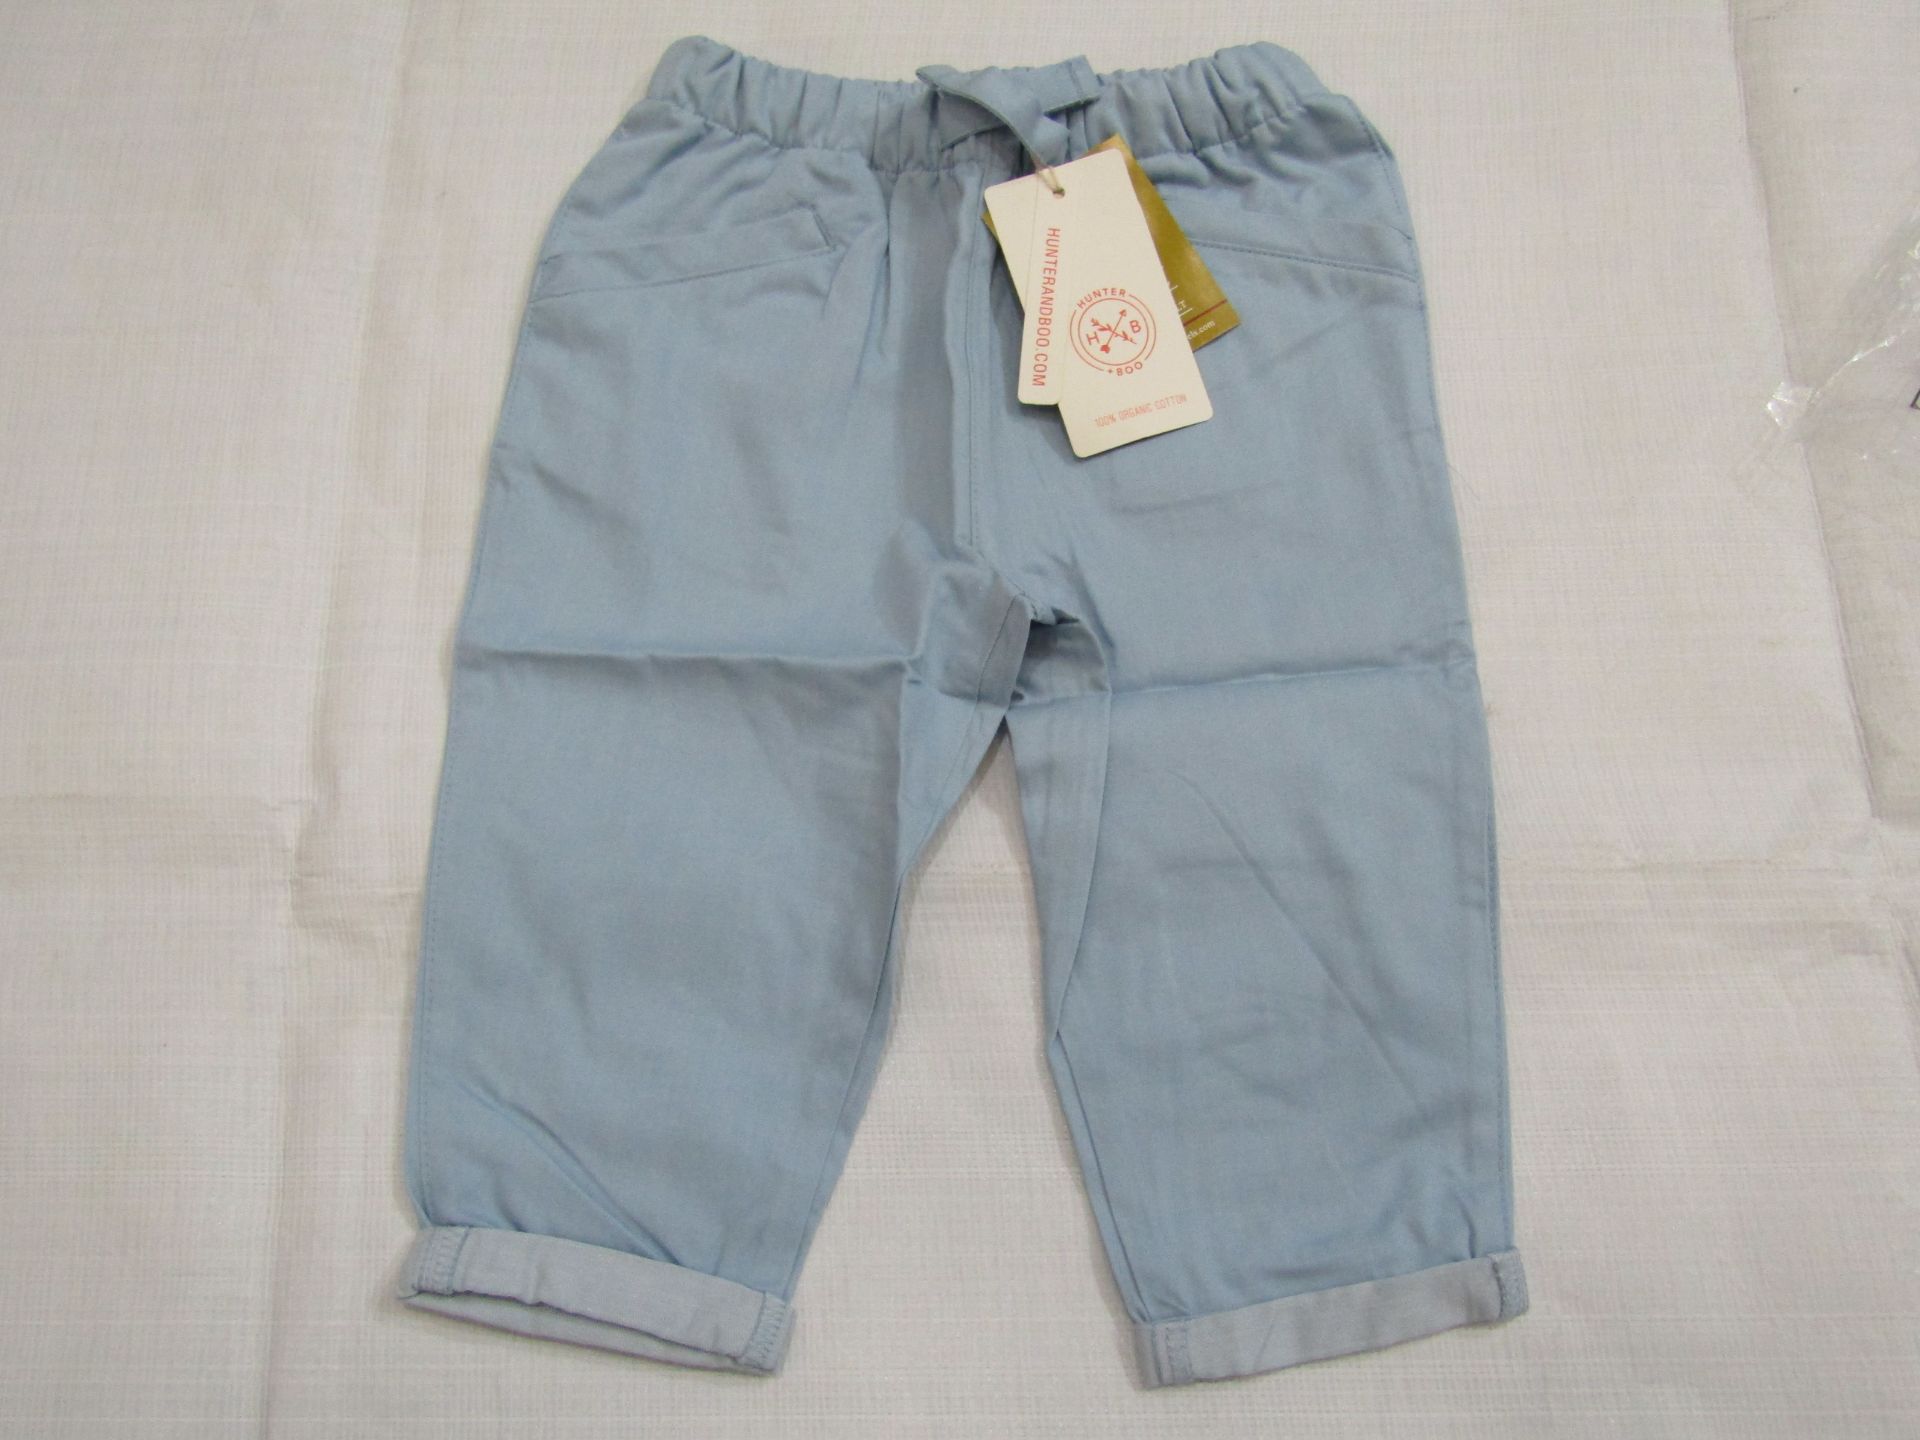 Hunter & Boo Chambray Trouser Blue Aged 6-12 Months New & Packaged RRP £24